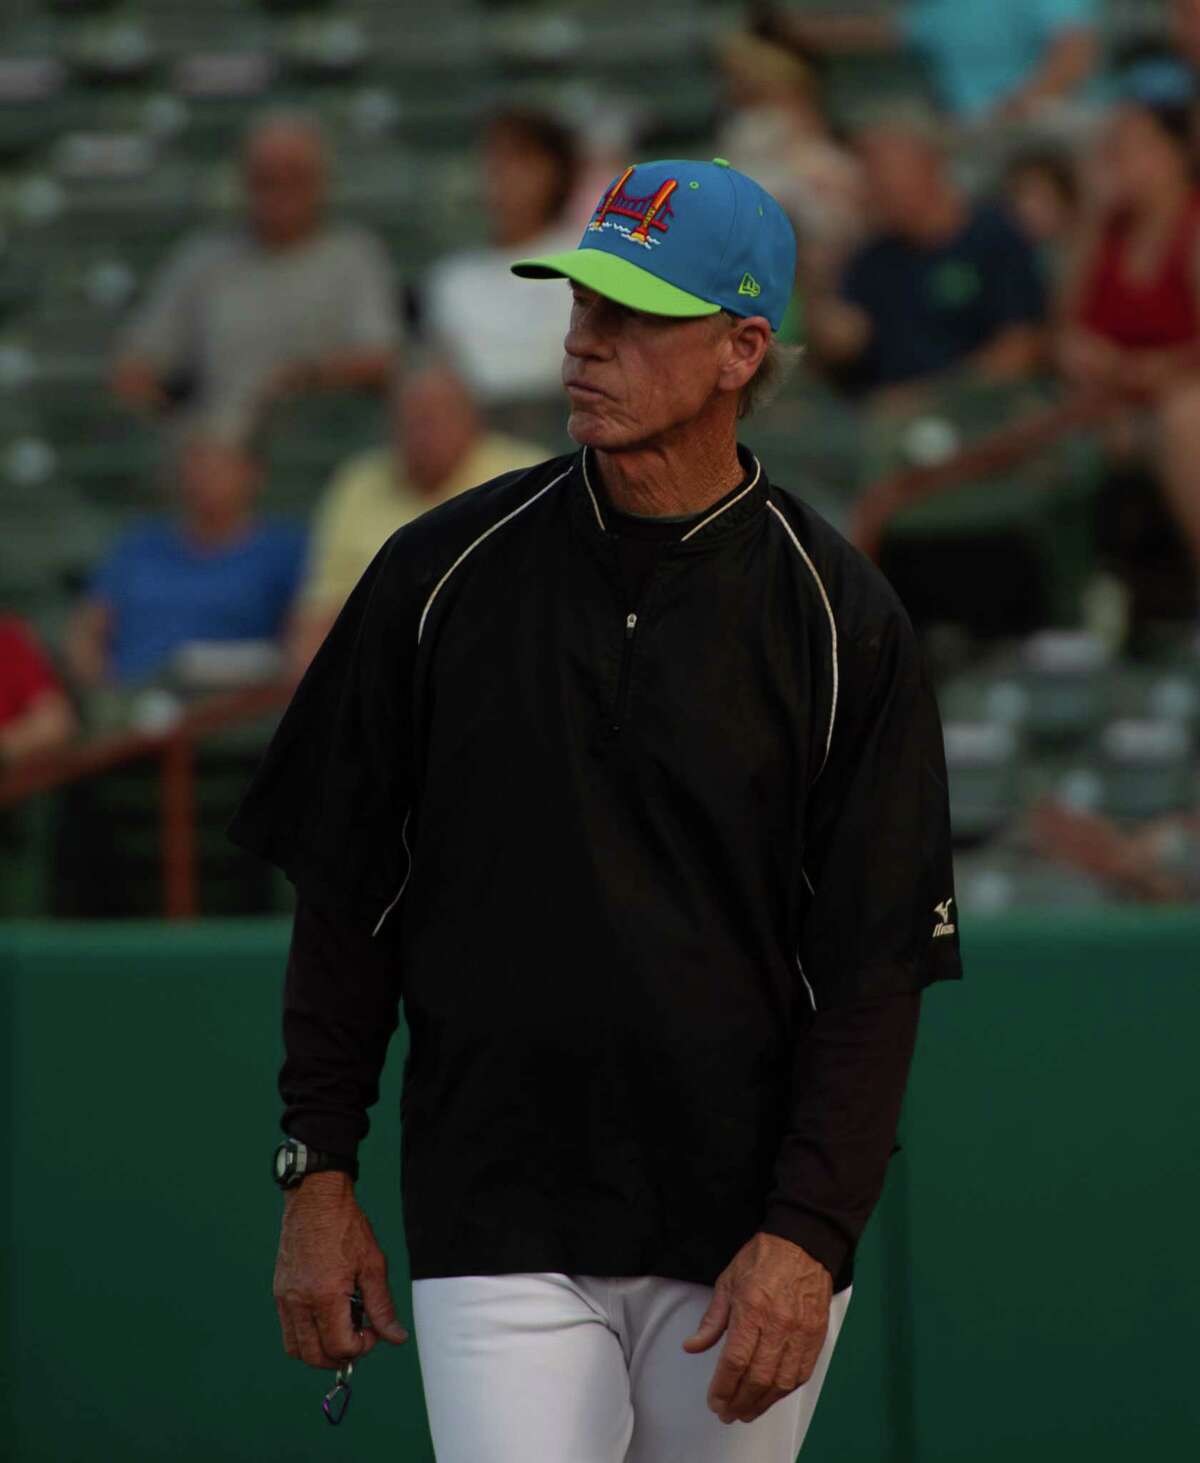 ValleyCats pitching coach Scott Budner came out of a three-year retirement to lead the Tri-City pitching staff, including new arrival Kumar Rocker.